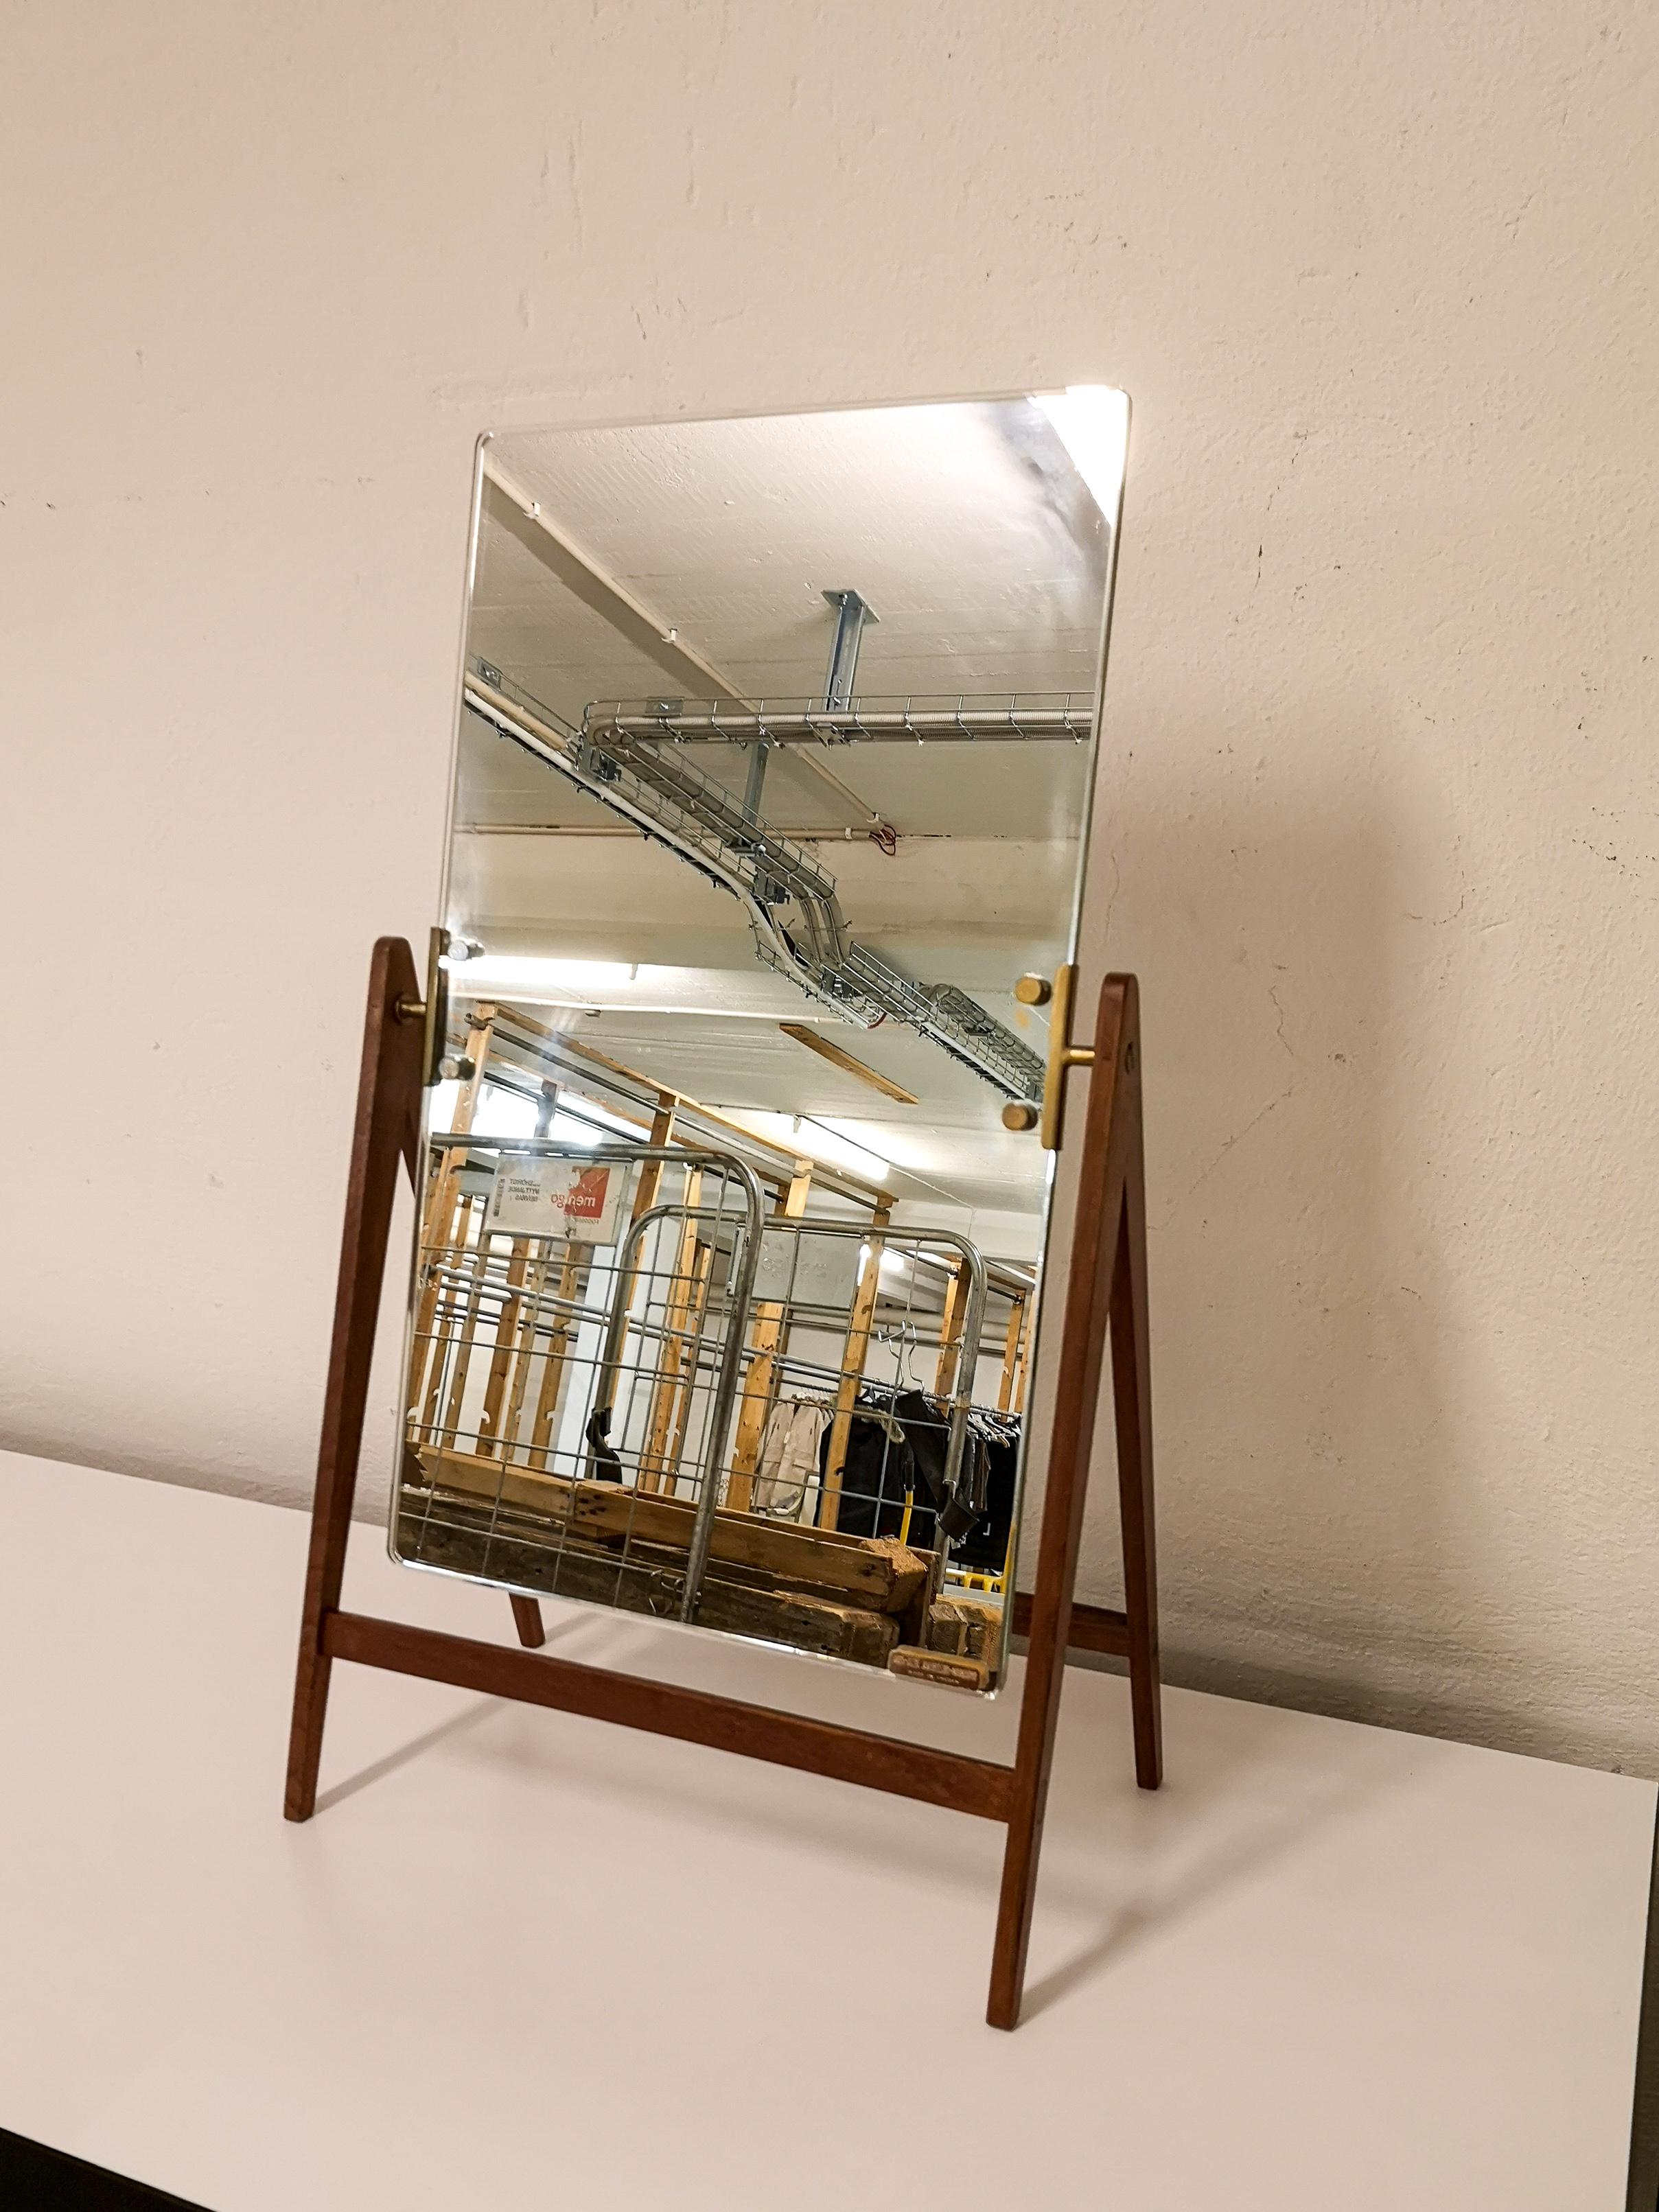 This rare midcentury table mirror in brass and teak was produced in Sweden at AB Markaryd and designed by Hans-Agne Jakobsson. The mirror stands on a teak foundation and has a swinging mode to be able to adjust the position. The brass details and